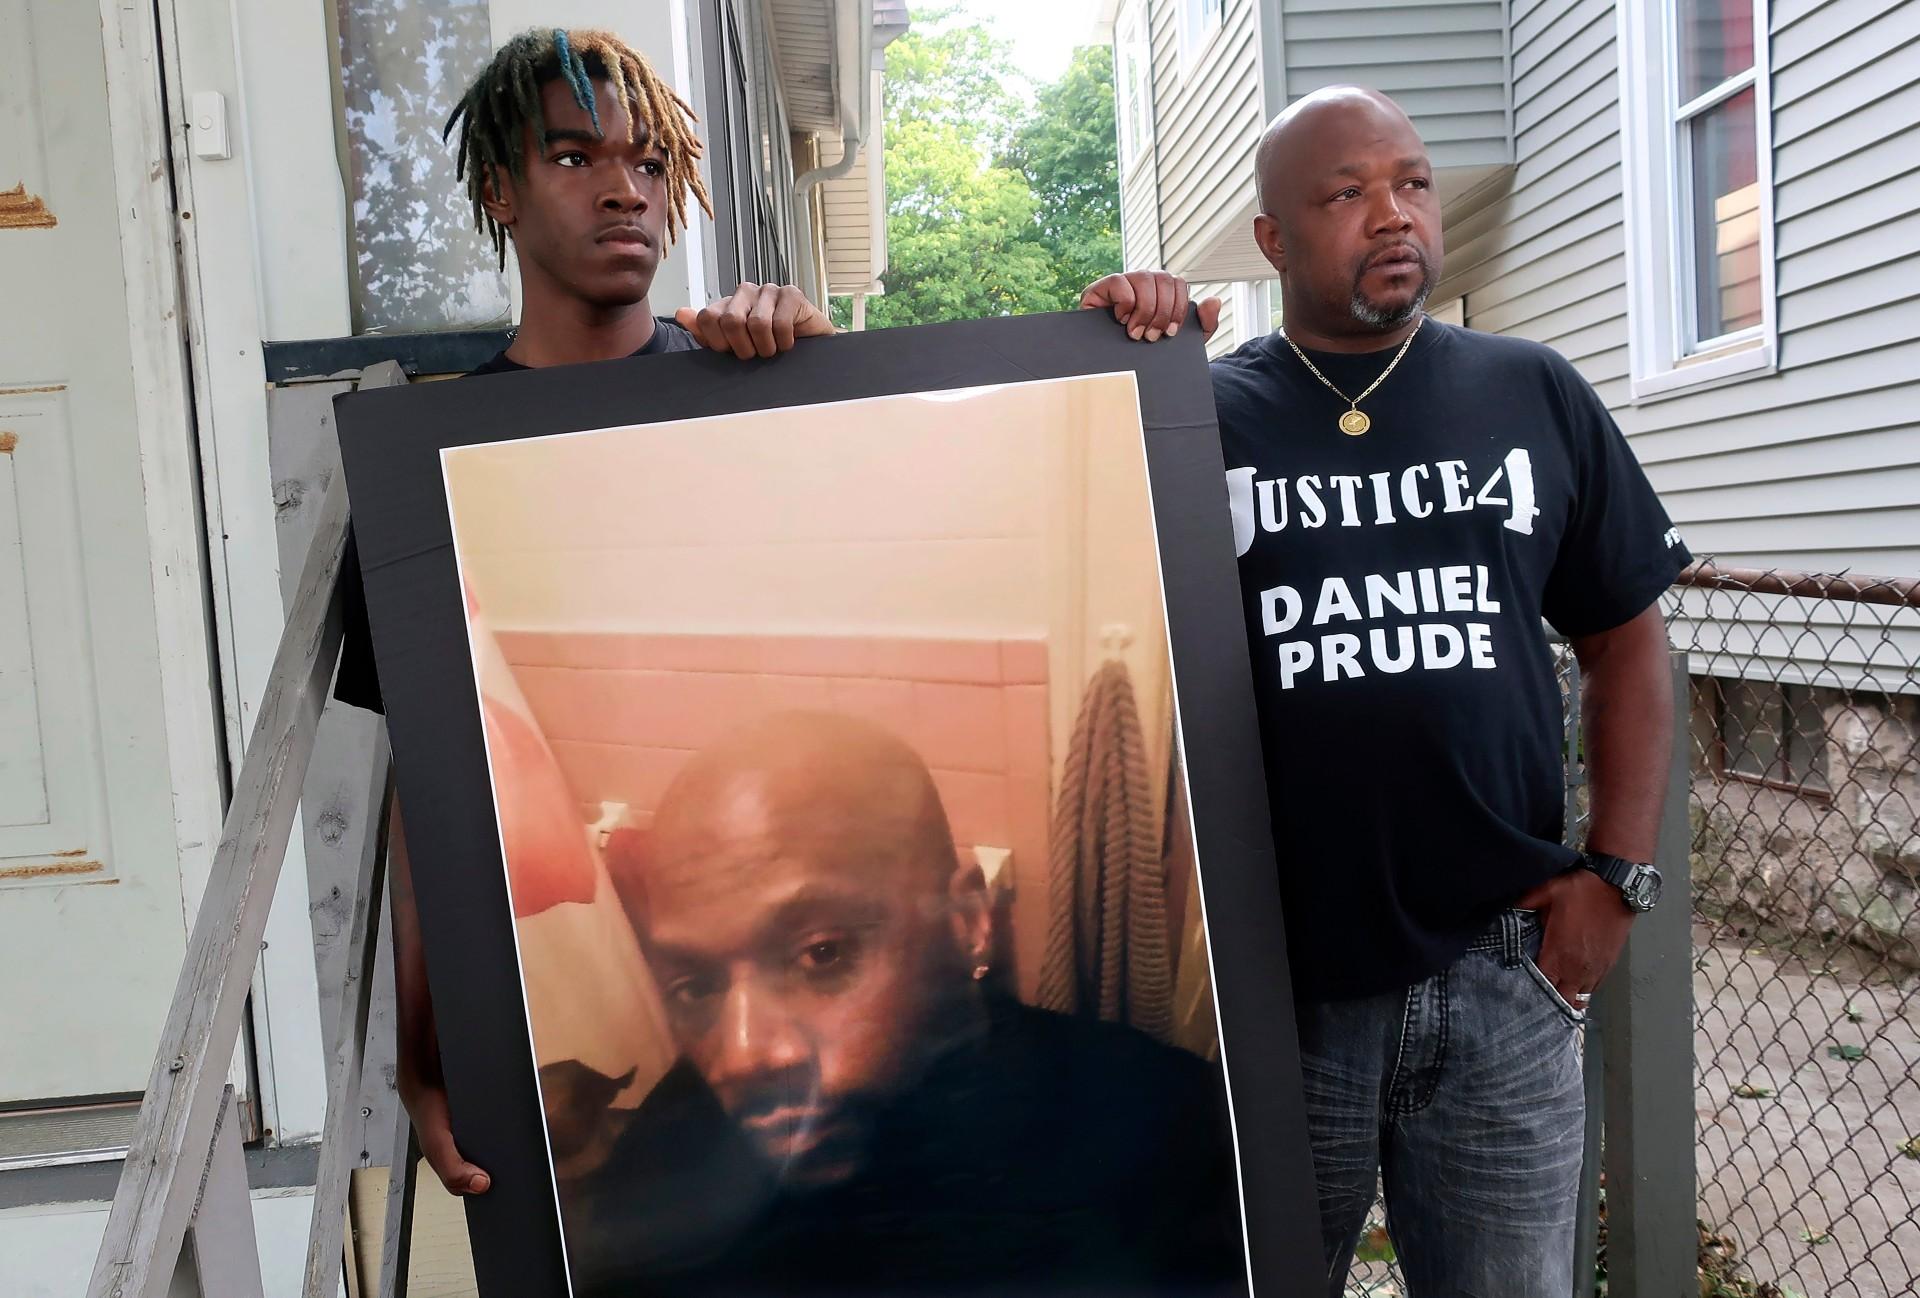 In this Sept. 3, 2020, file photo, Joe Prude, right, brother of Daniel Prude, and Daniel's nephew Armin, stand with a picture of Daniel Prude in Rochester, N.Y. (AP Photo / Ted Shaffrey, File)